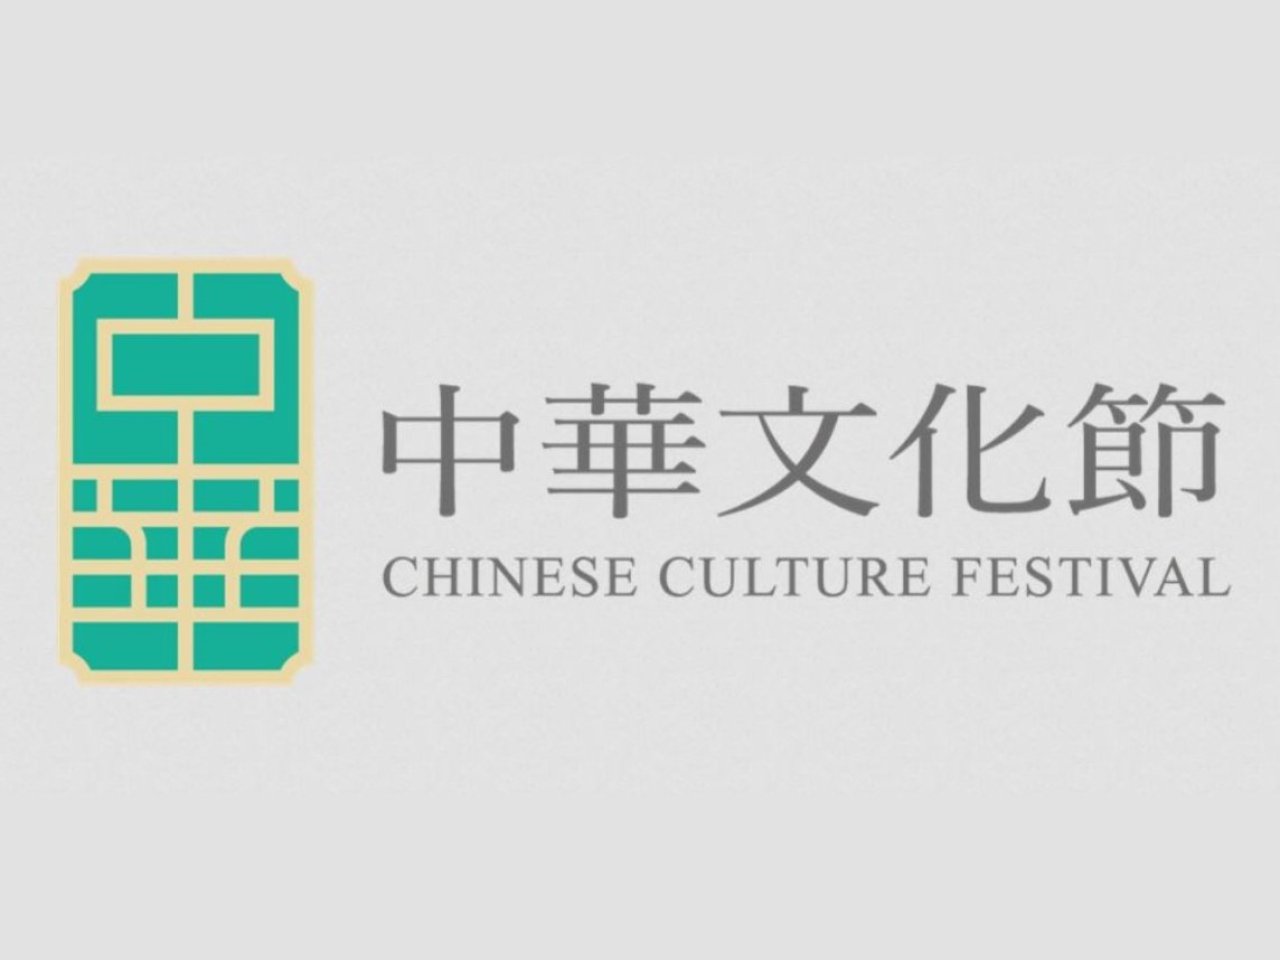 Chinese Culture Festival tickets on sale from Friday